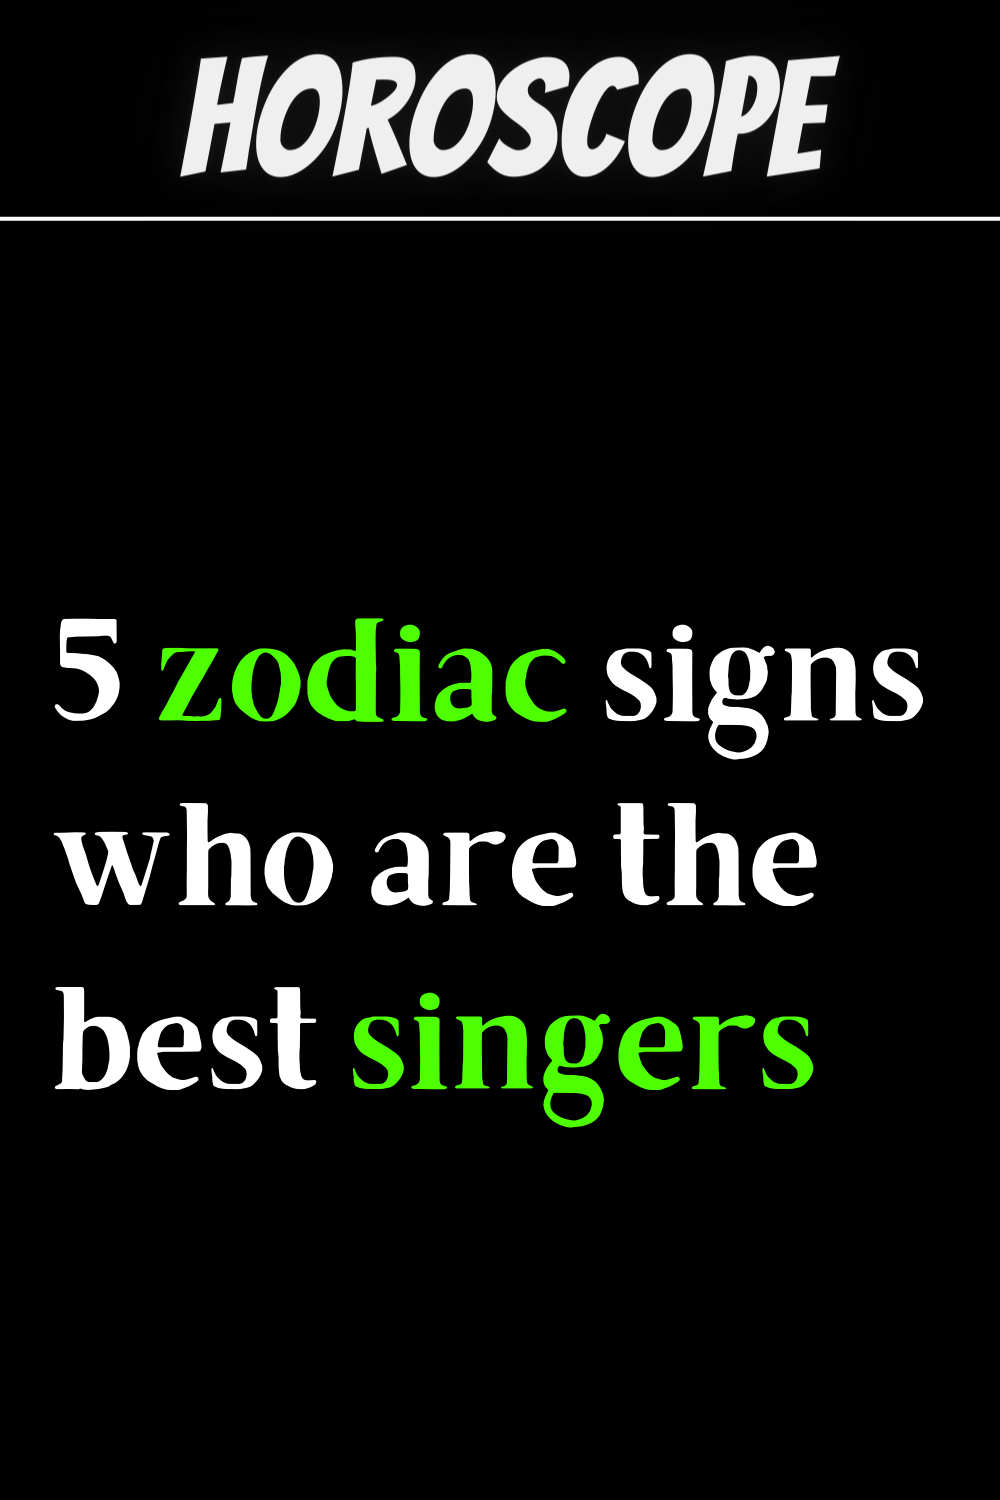 5 zodiac signs who are the best singers